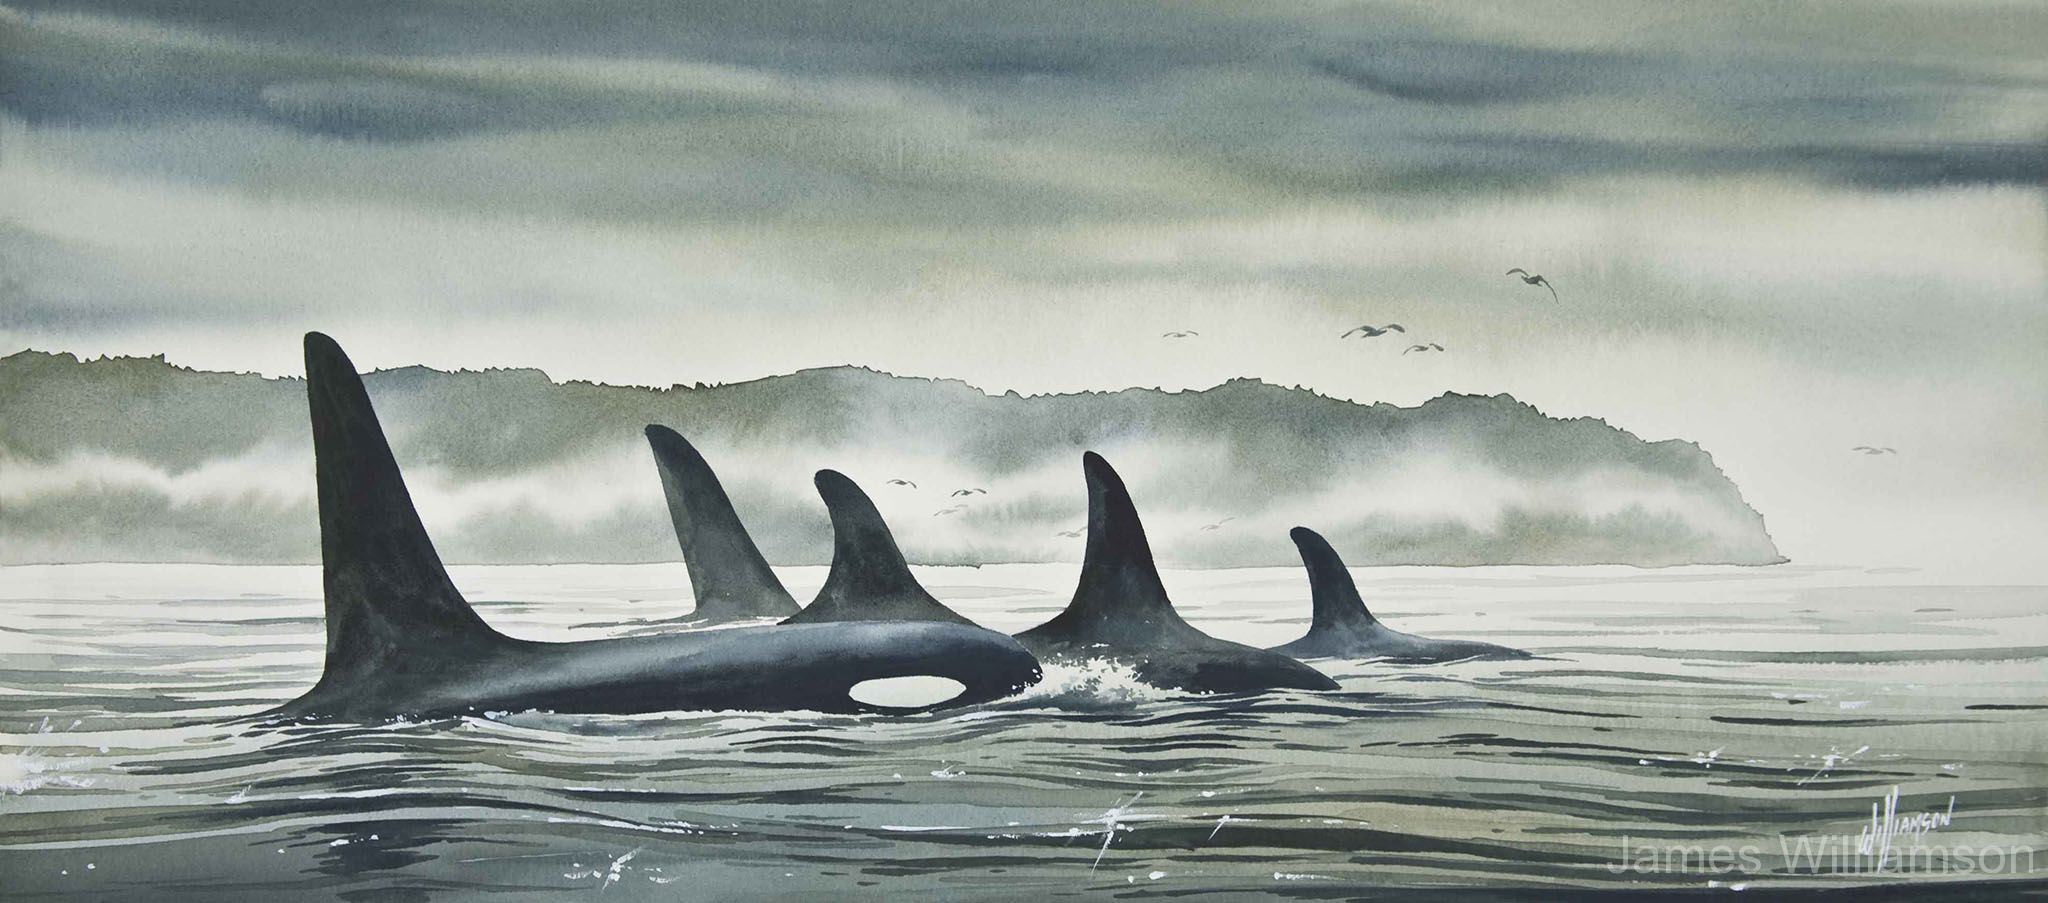 Williamson_J_08_Realm-of-the-Orca